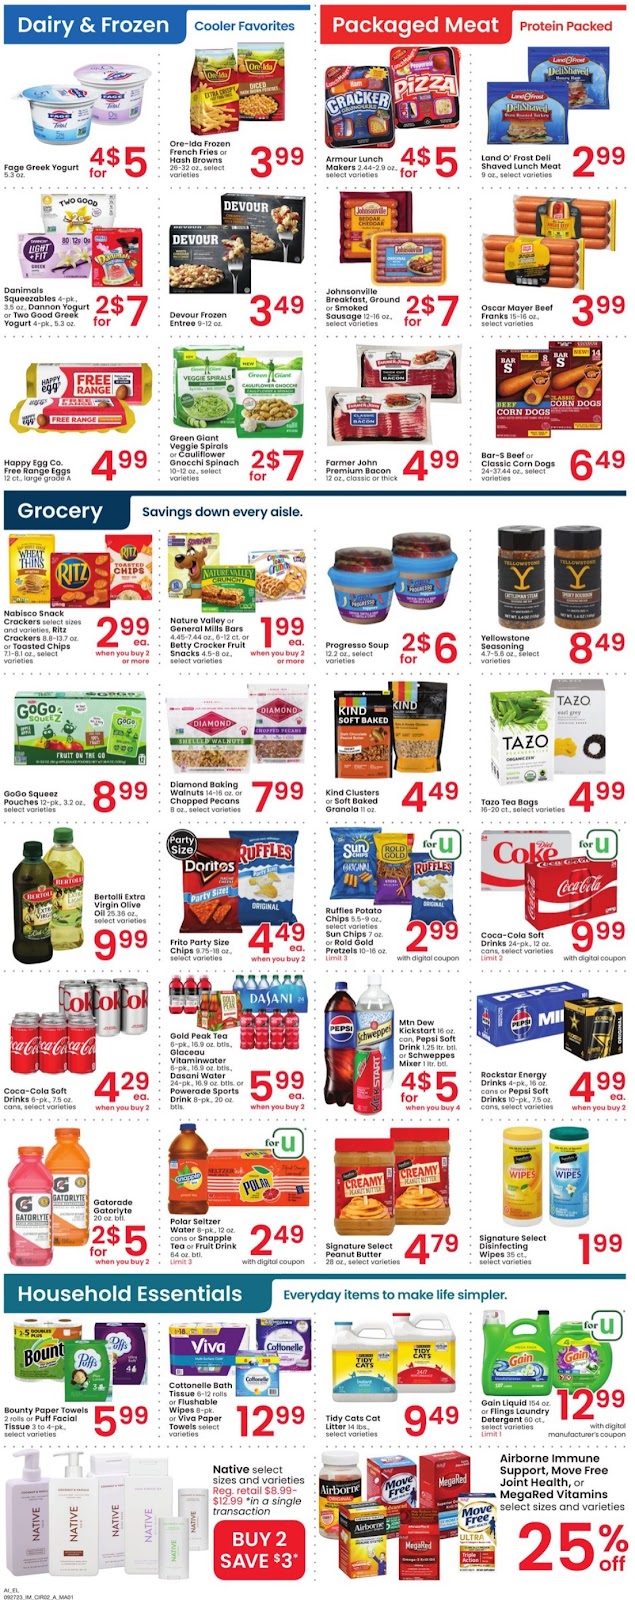 Albertsons Weekly Ad - 3